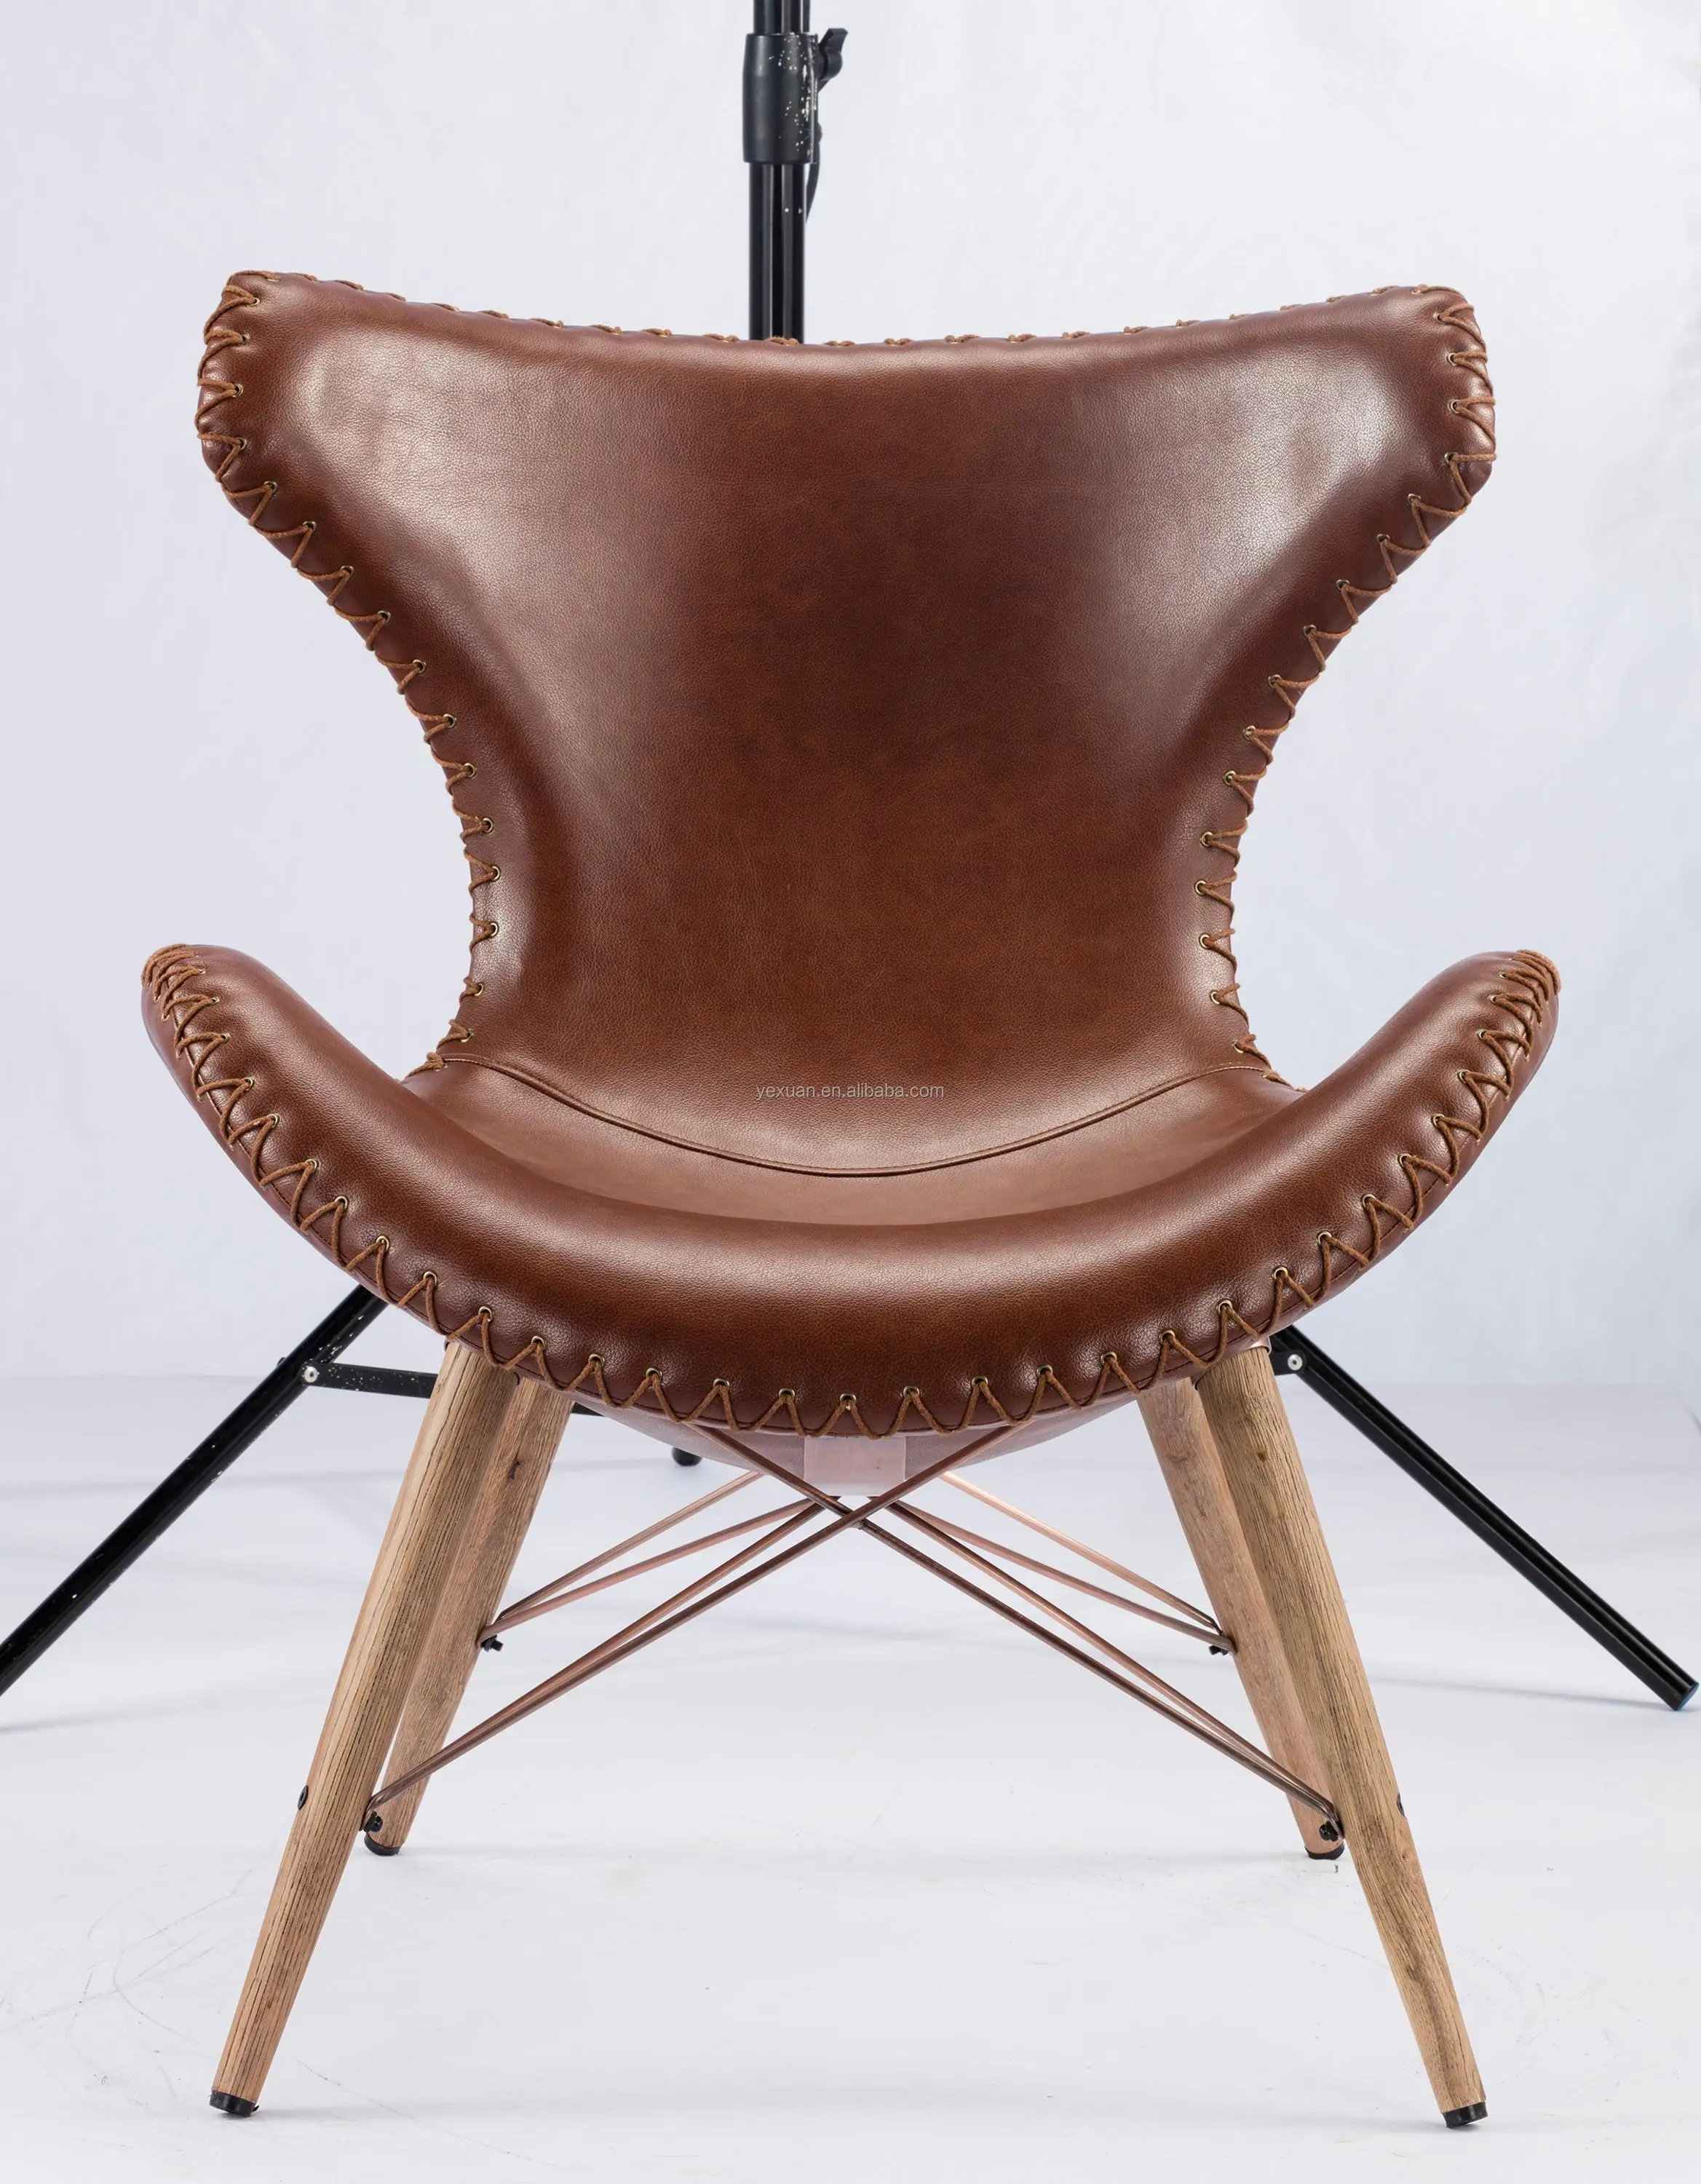 Fashion Design Luxury Leather Office Chair - Buy Leather Chair,Leather